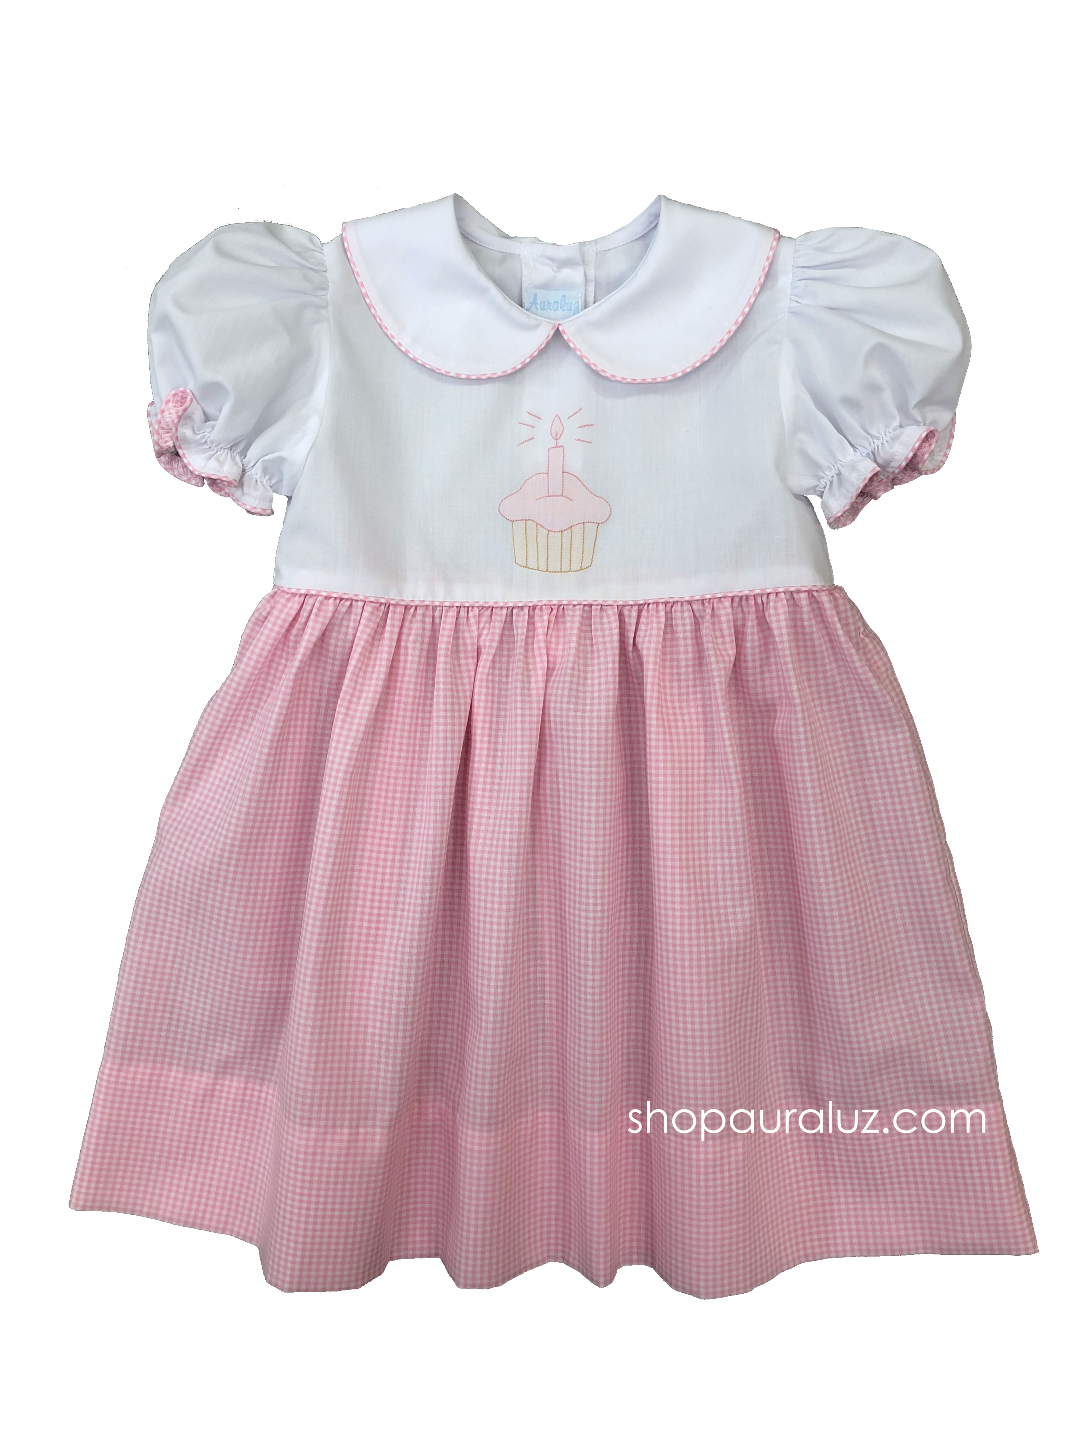 Auraluz Girl Dress...White/pink check with p.p. collar and embroidered cupcake. STORE EXCLUSIVE!